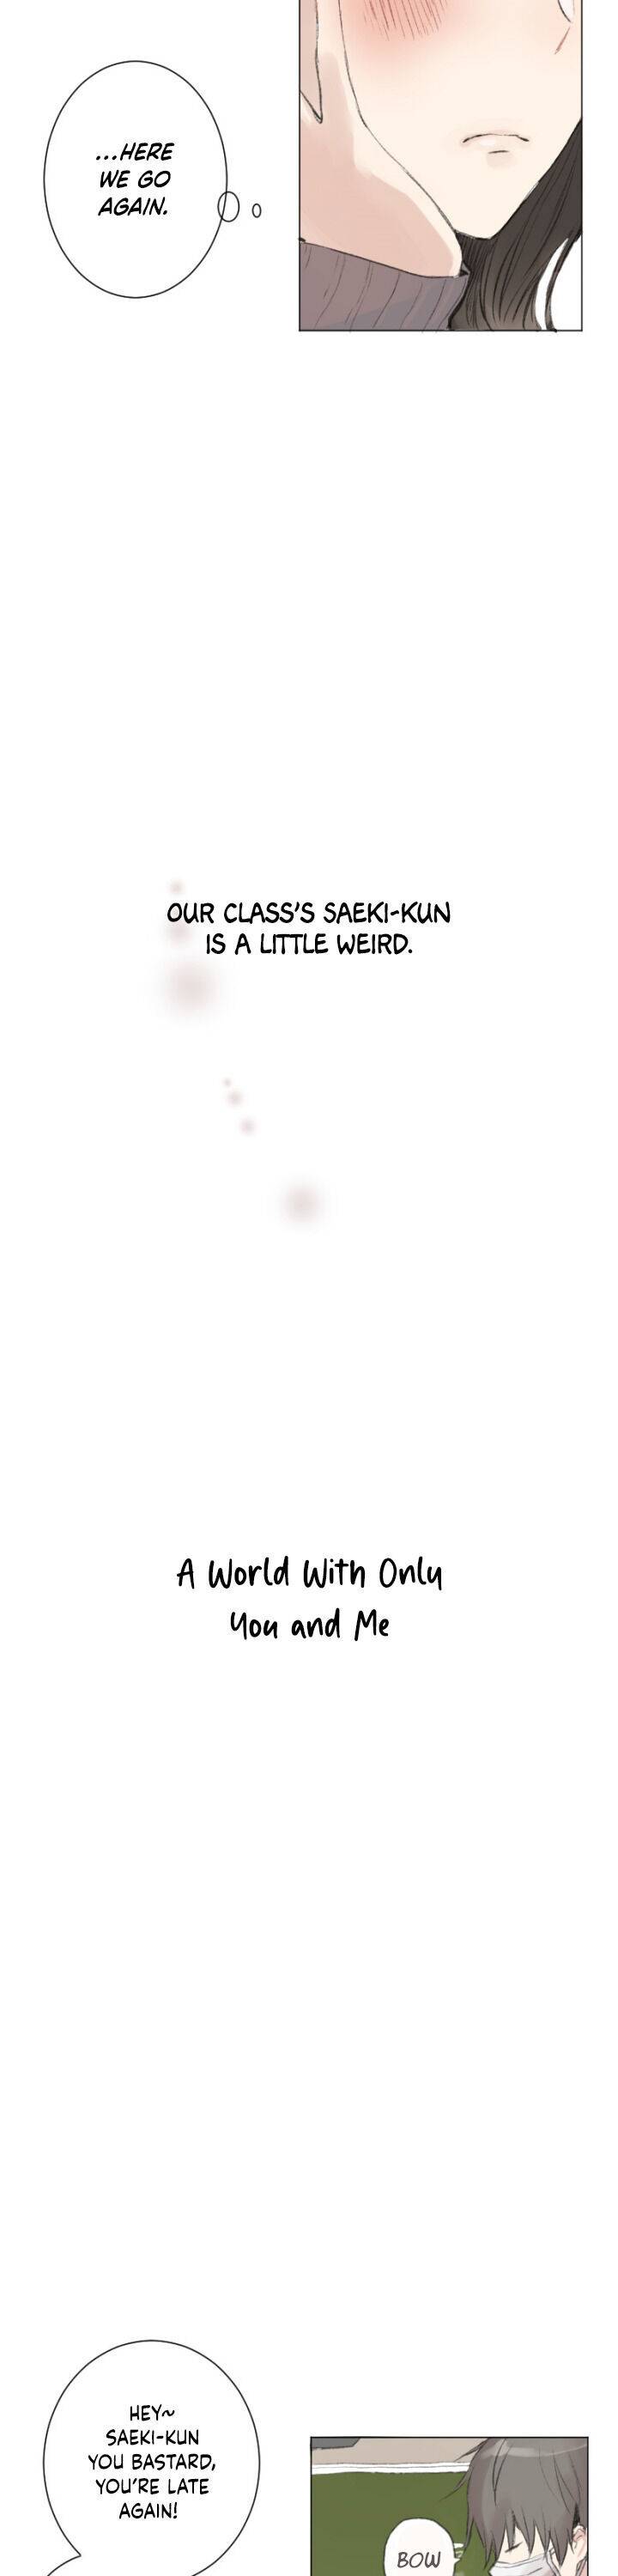 The World With Only You And Me - Page 3